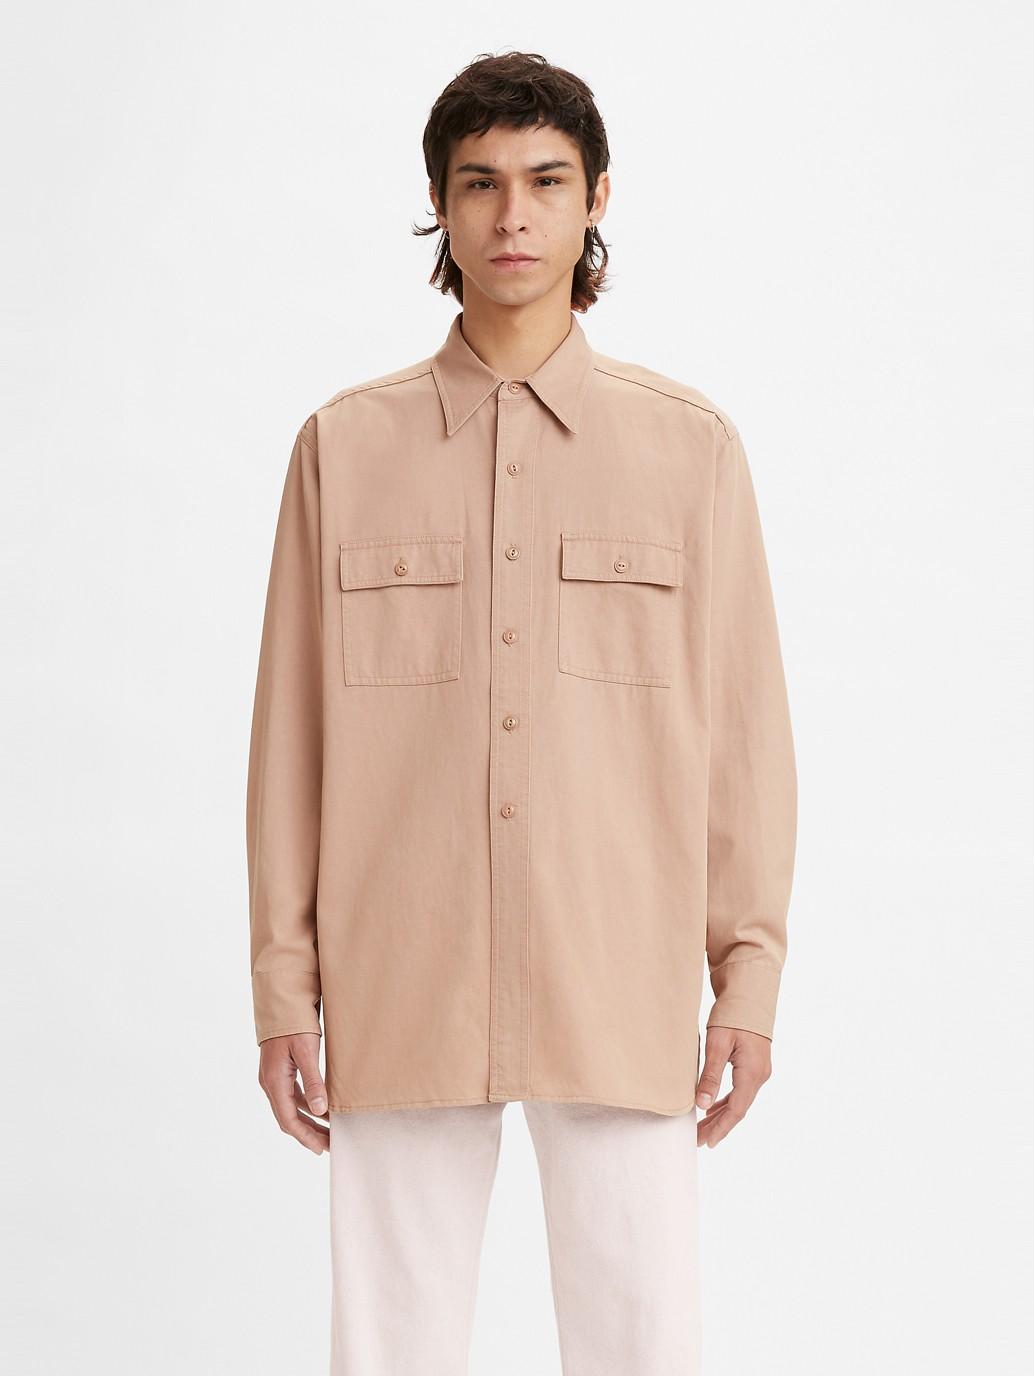 Buy Levi's® Made & Crafted® Men's Scout Shirt | Levi's® Official